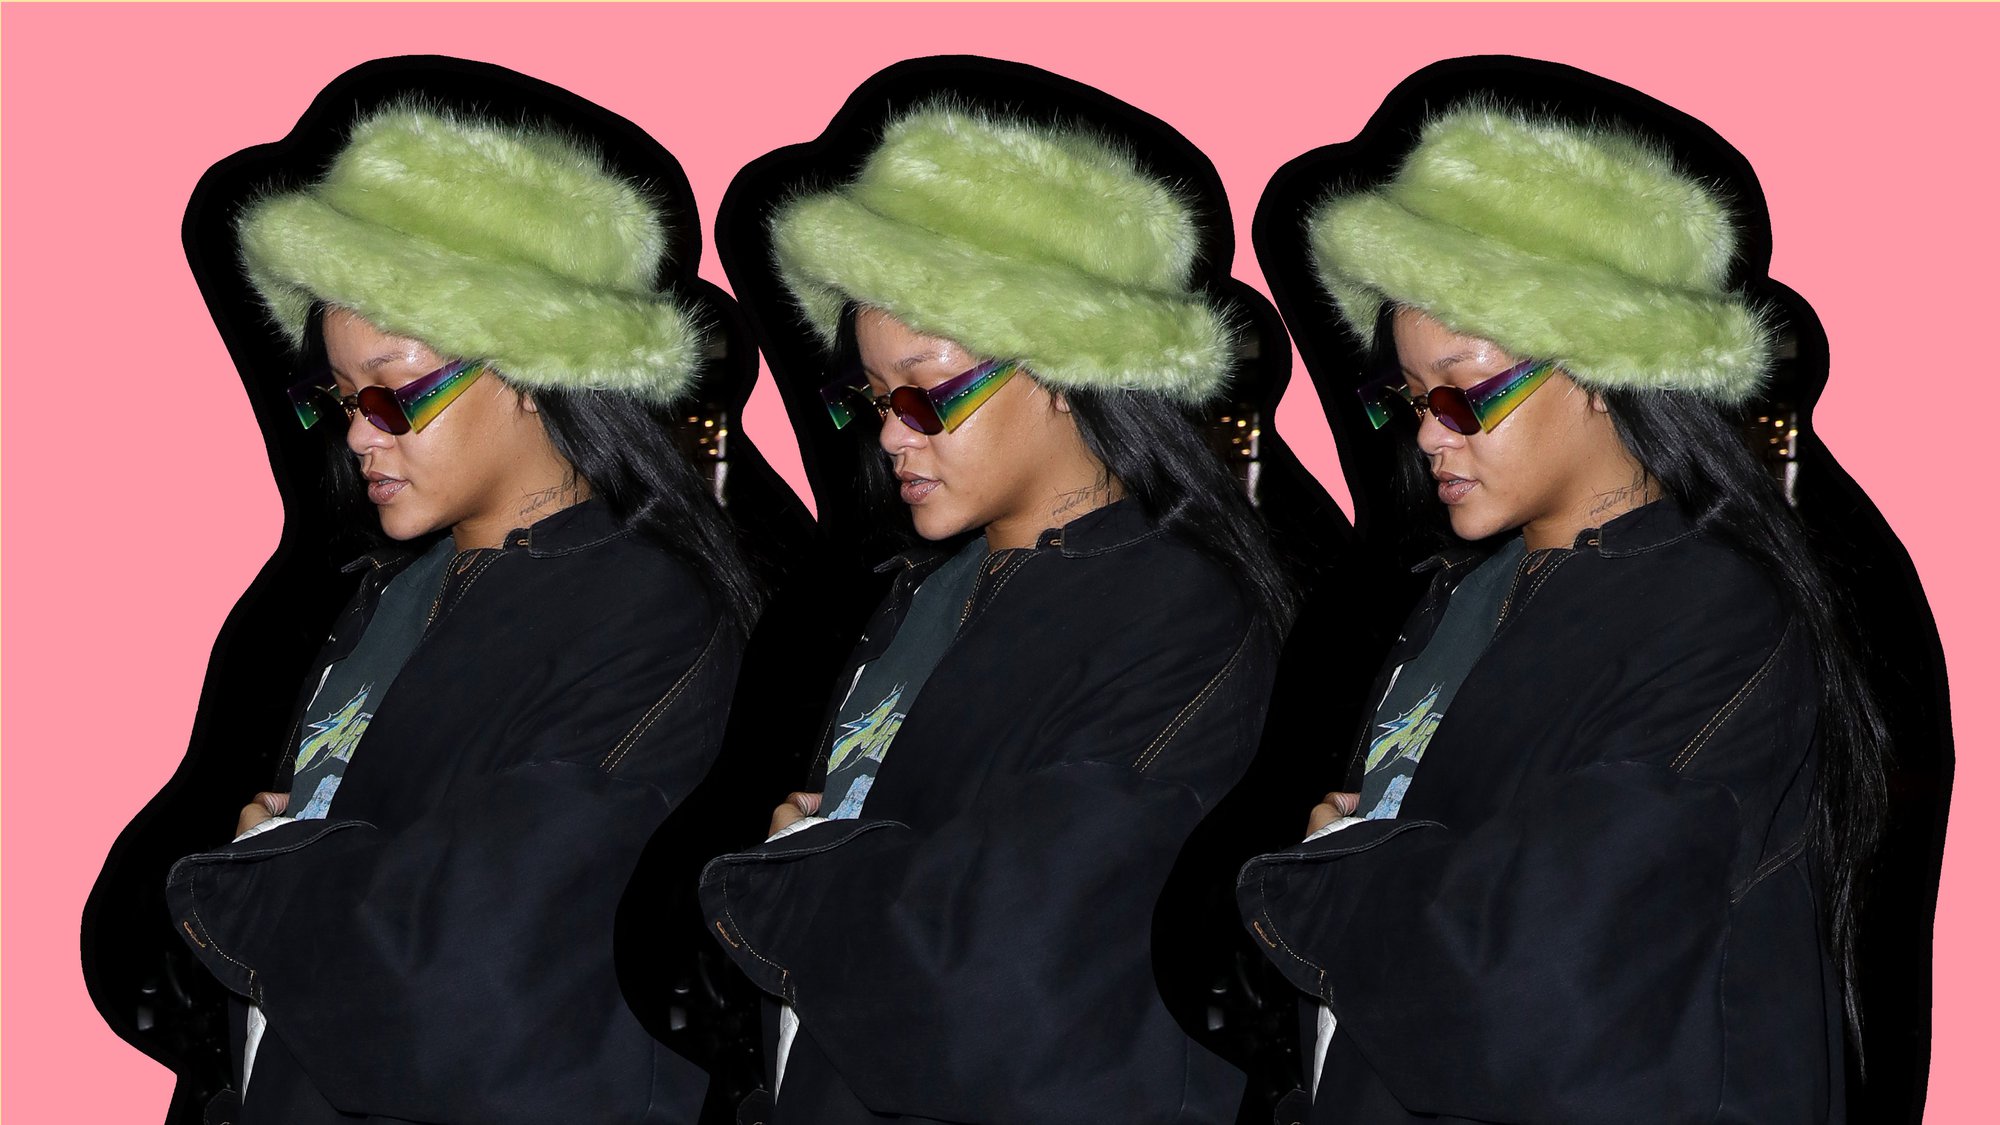 The Fuzzy Bucket Hat Trend We're Copying from Rihanna | Teen Vogue